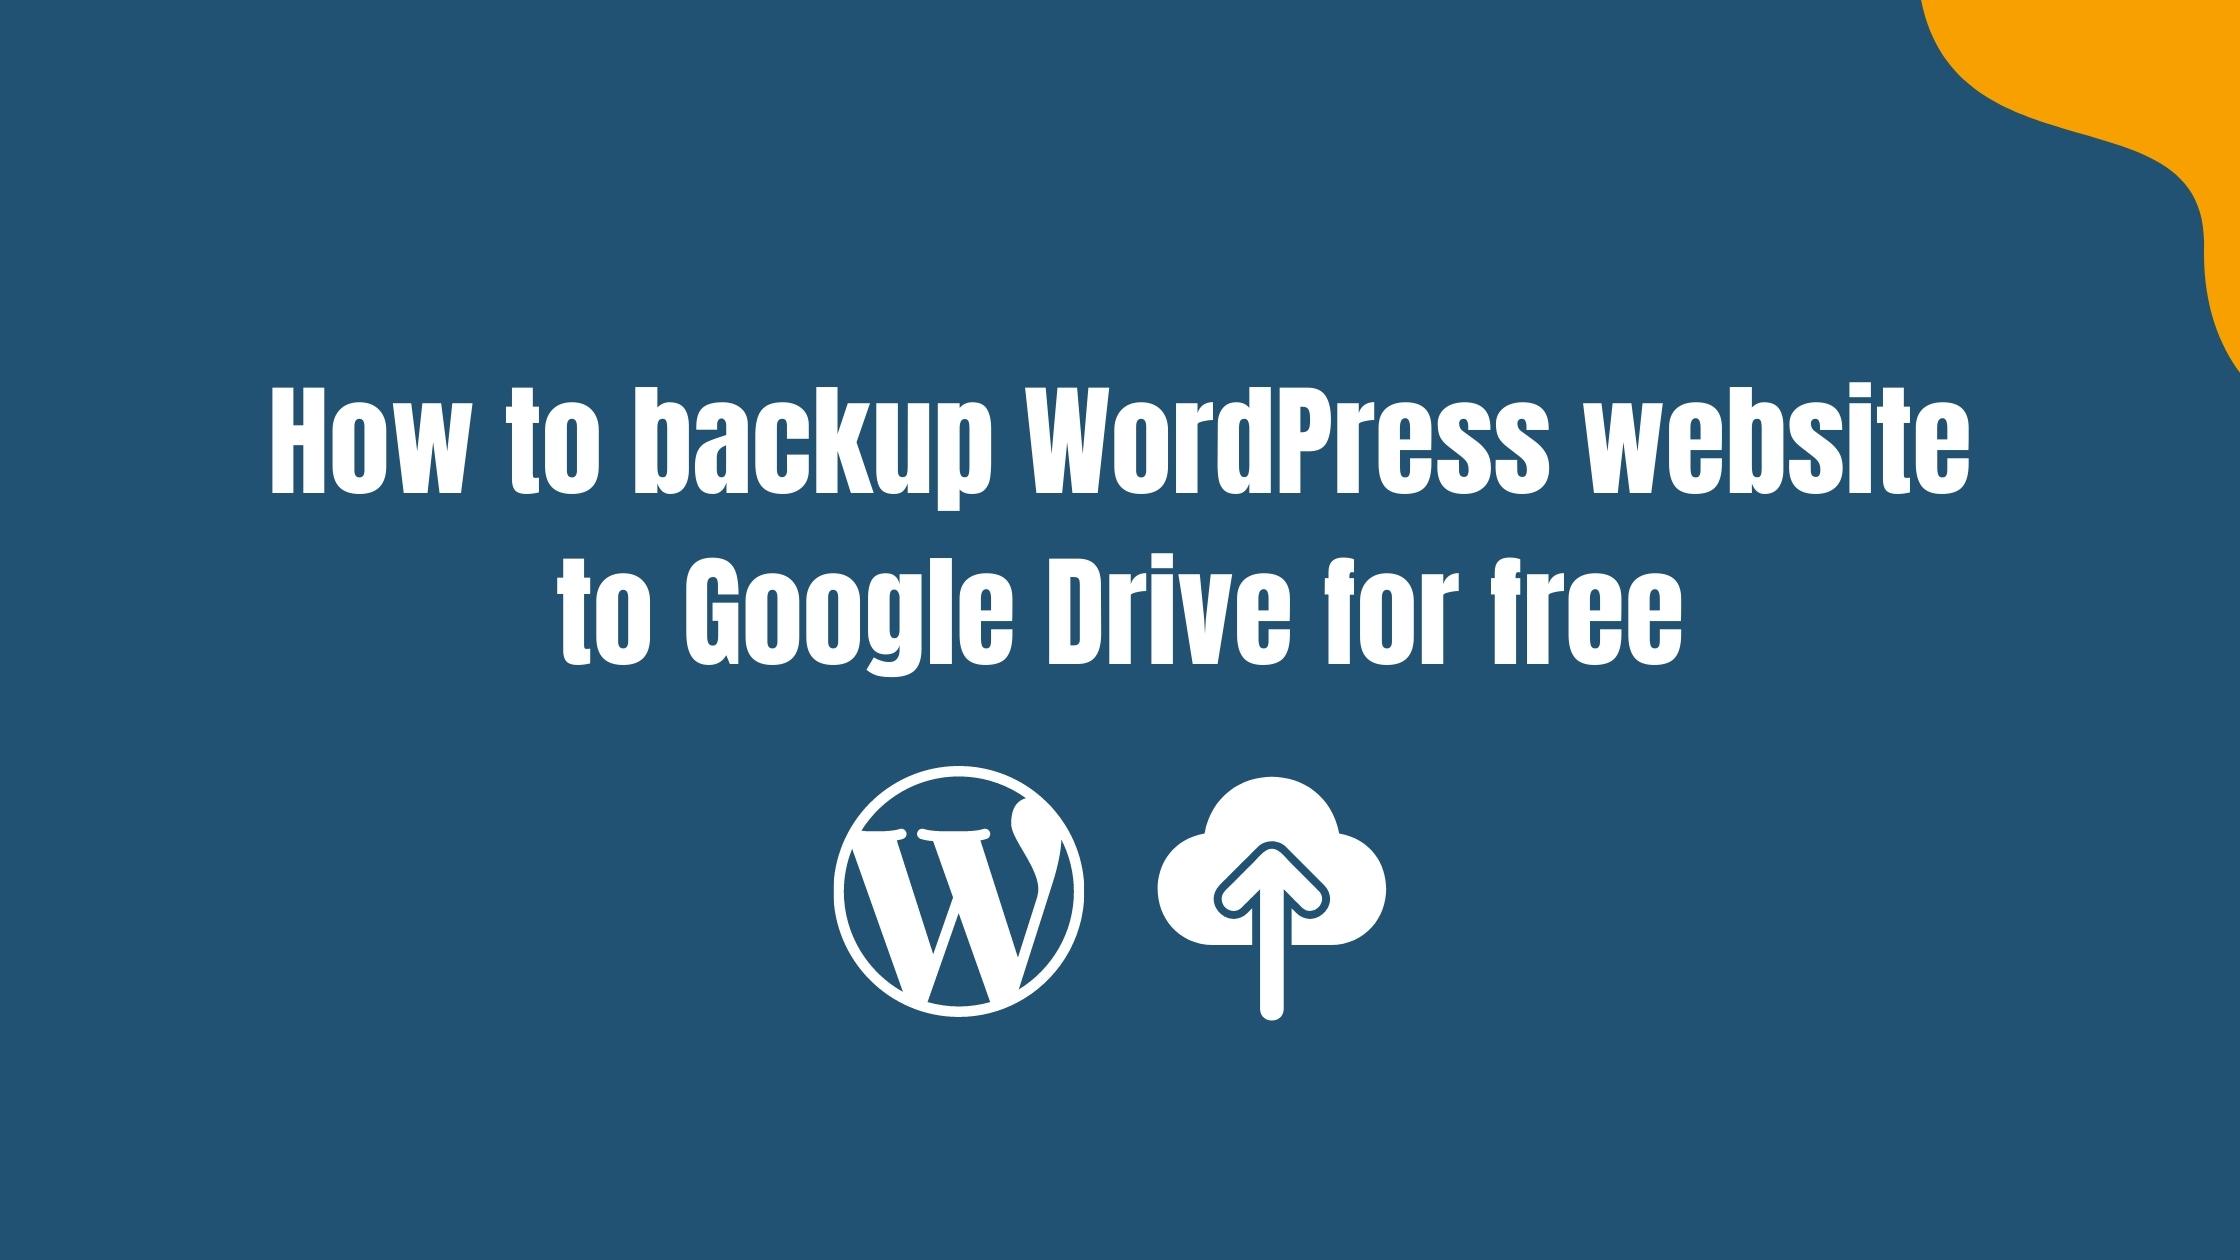 How to backup WordPress website to Google Drive for free